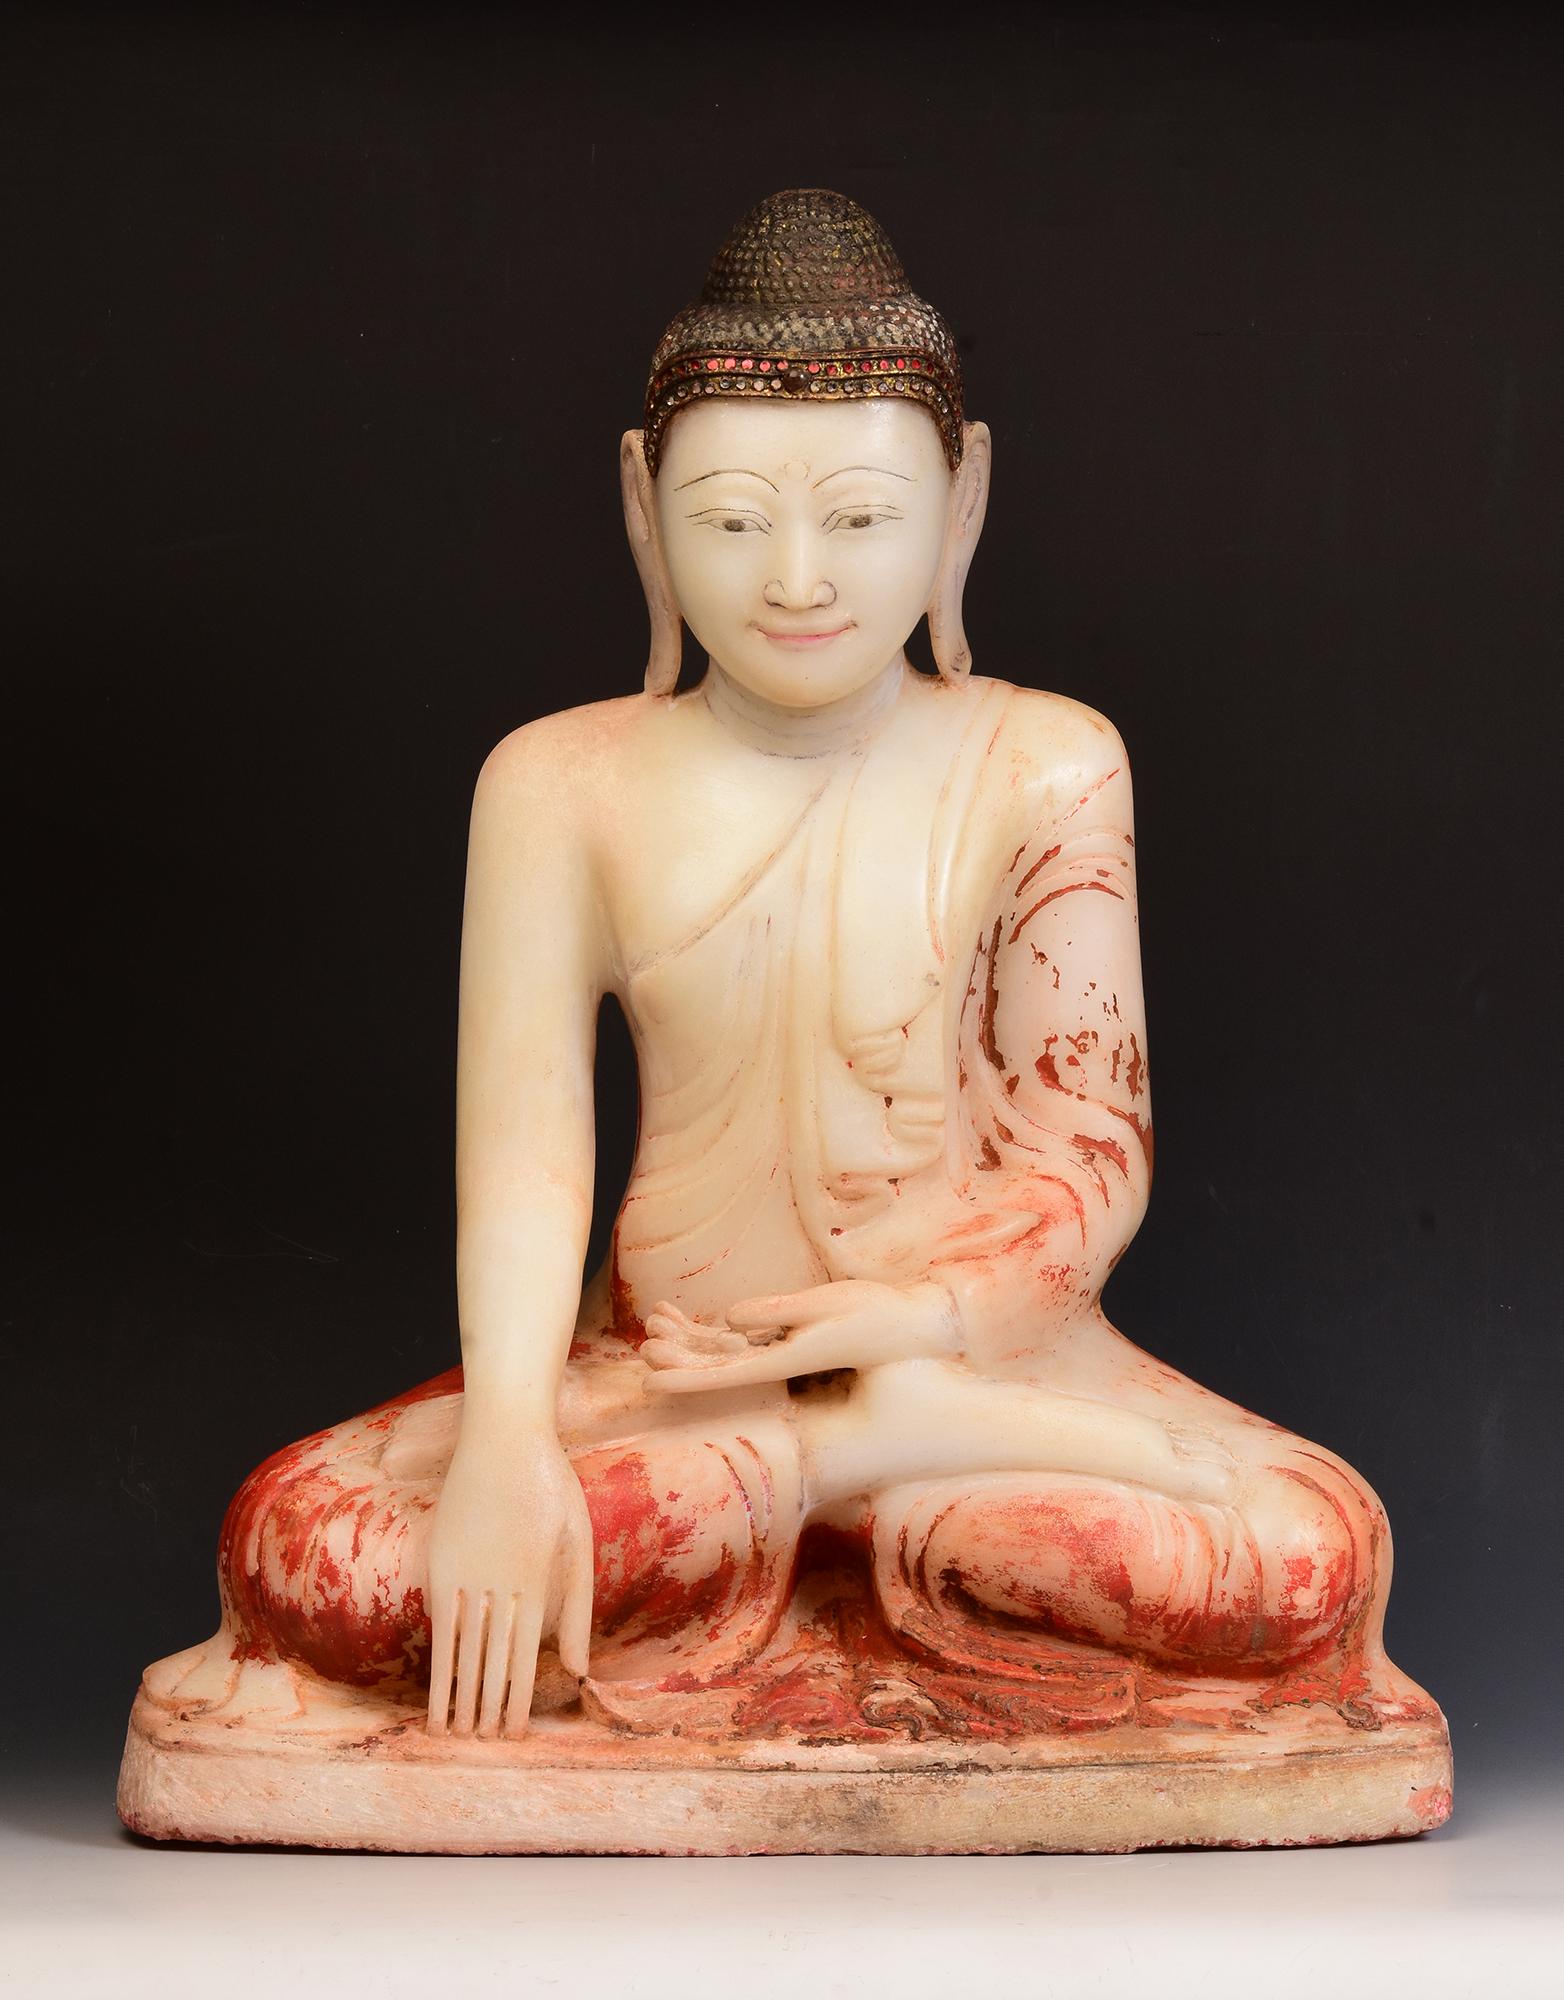 Antique Burmese alabaster Buddha sitting in Mara Vijaya (calling the earth to witness) posture on a base, with inlay of colorful glass pieces on the headband.

Age: Burma, Mandalay Period, 19th Century
Size: Height 57.8 C.M. / Width 46.8 C.M. /